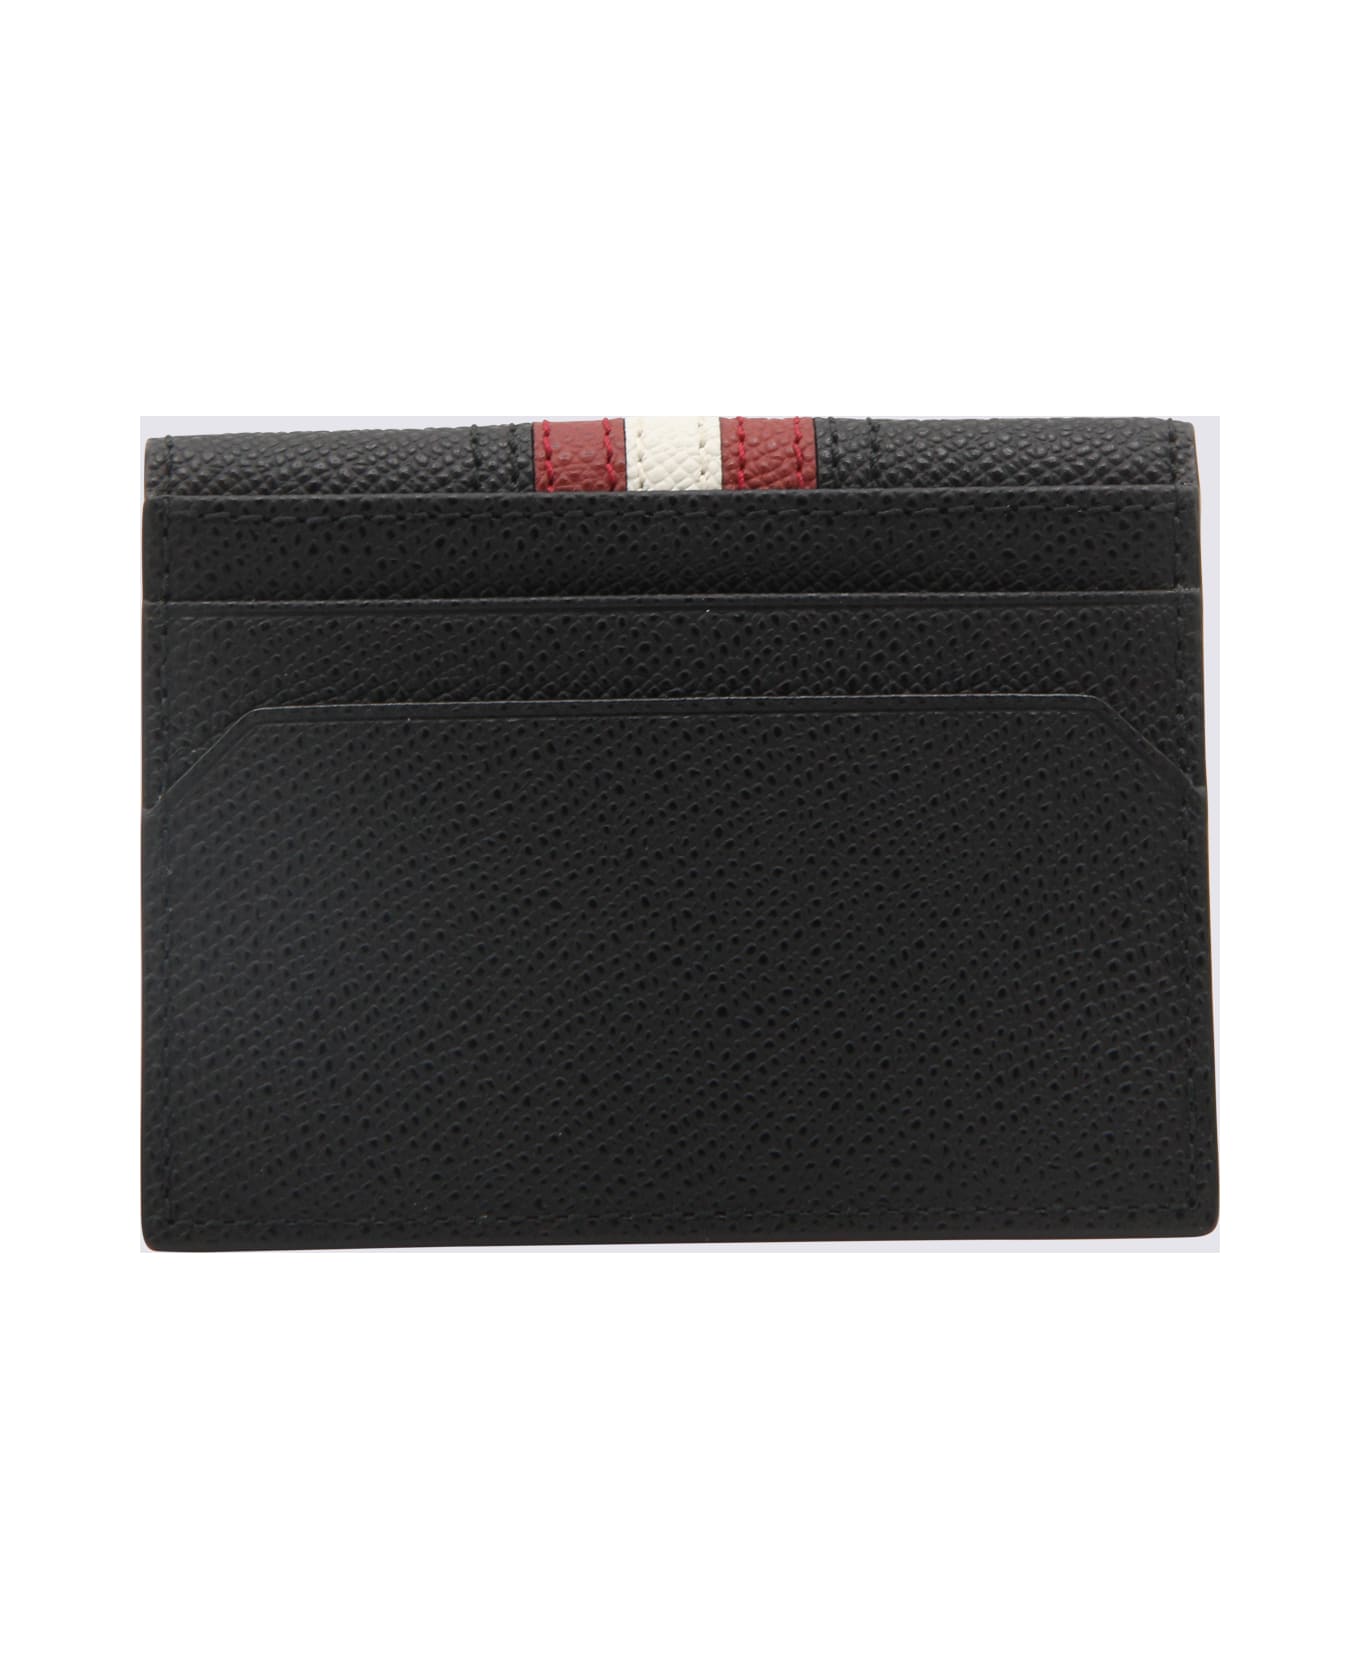 Bally Black, White And Red Leather Wallet - Black